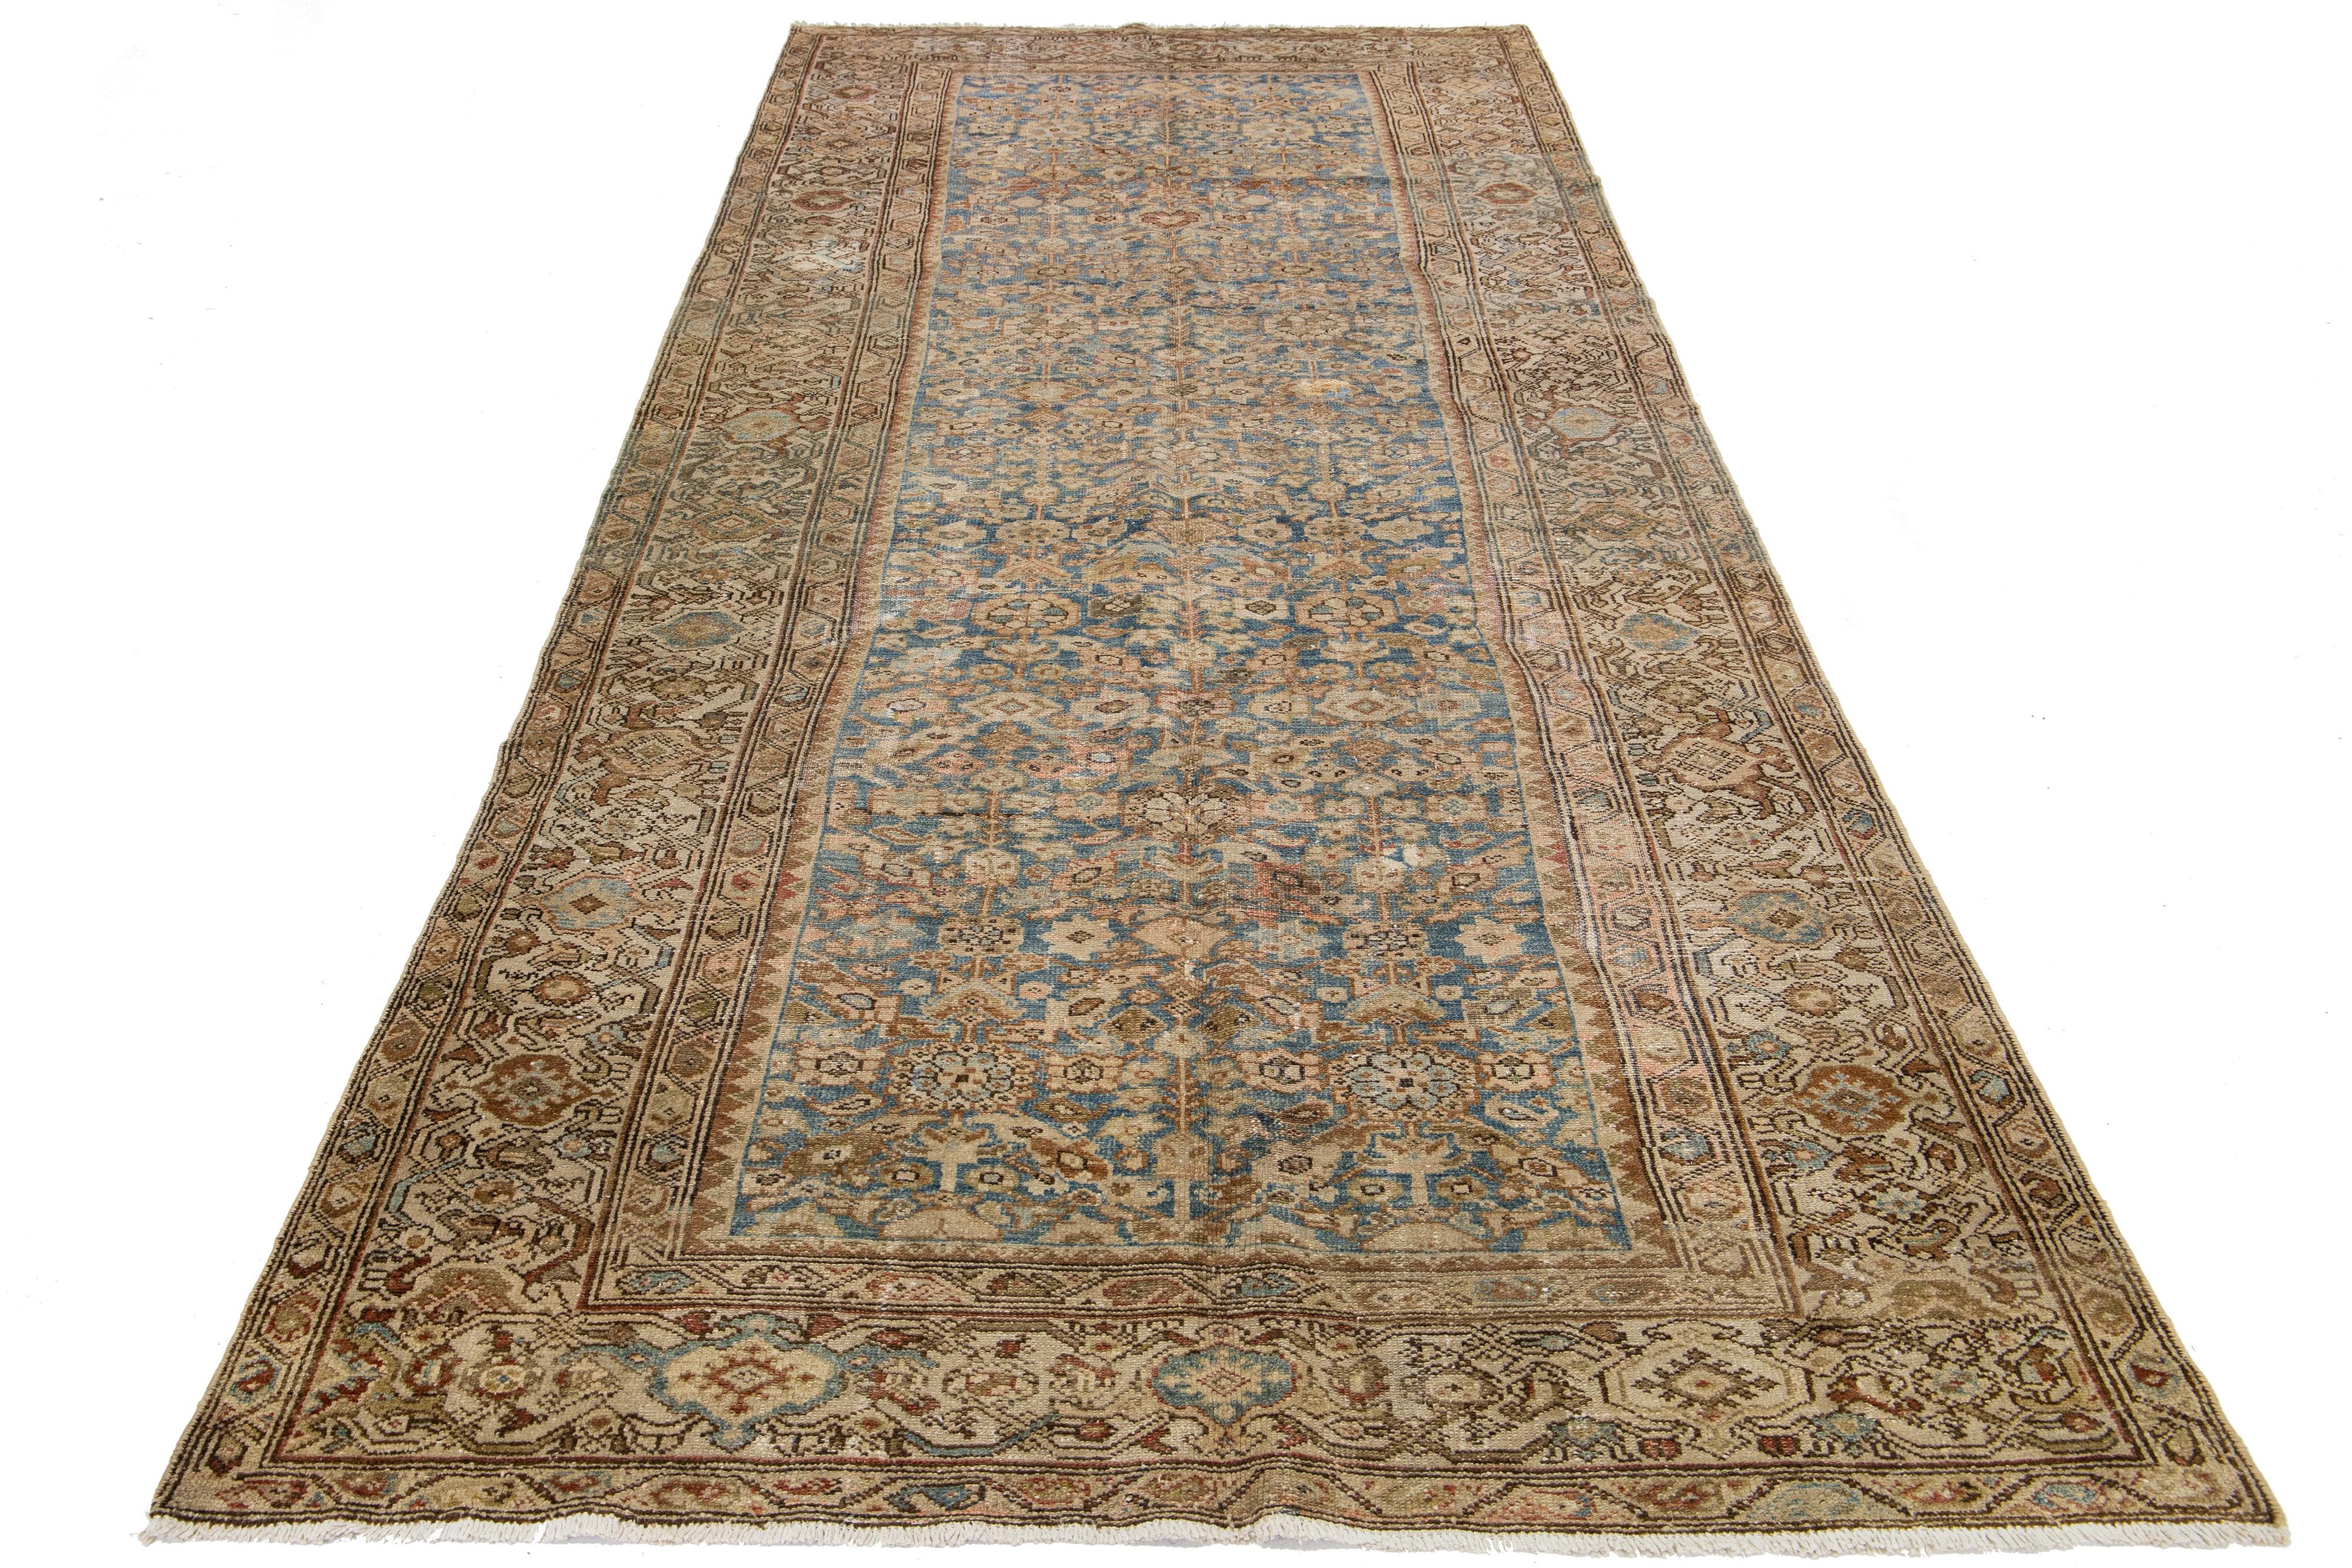 This antique Persian Malayer rug is hand-knotted wool. The design features a beautiful blue as the base, enhanced with brown, beige, and peach highlights in a stunning, detailed floral pattern.

This rug measures 5'3